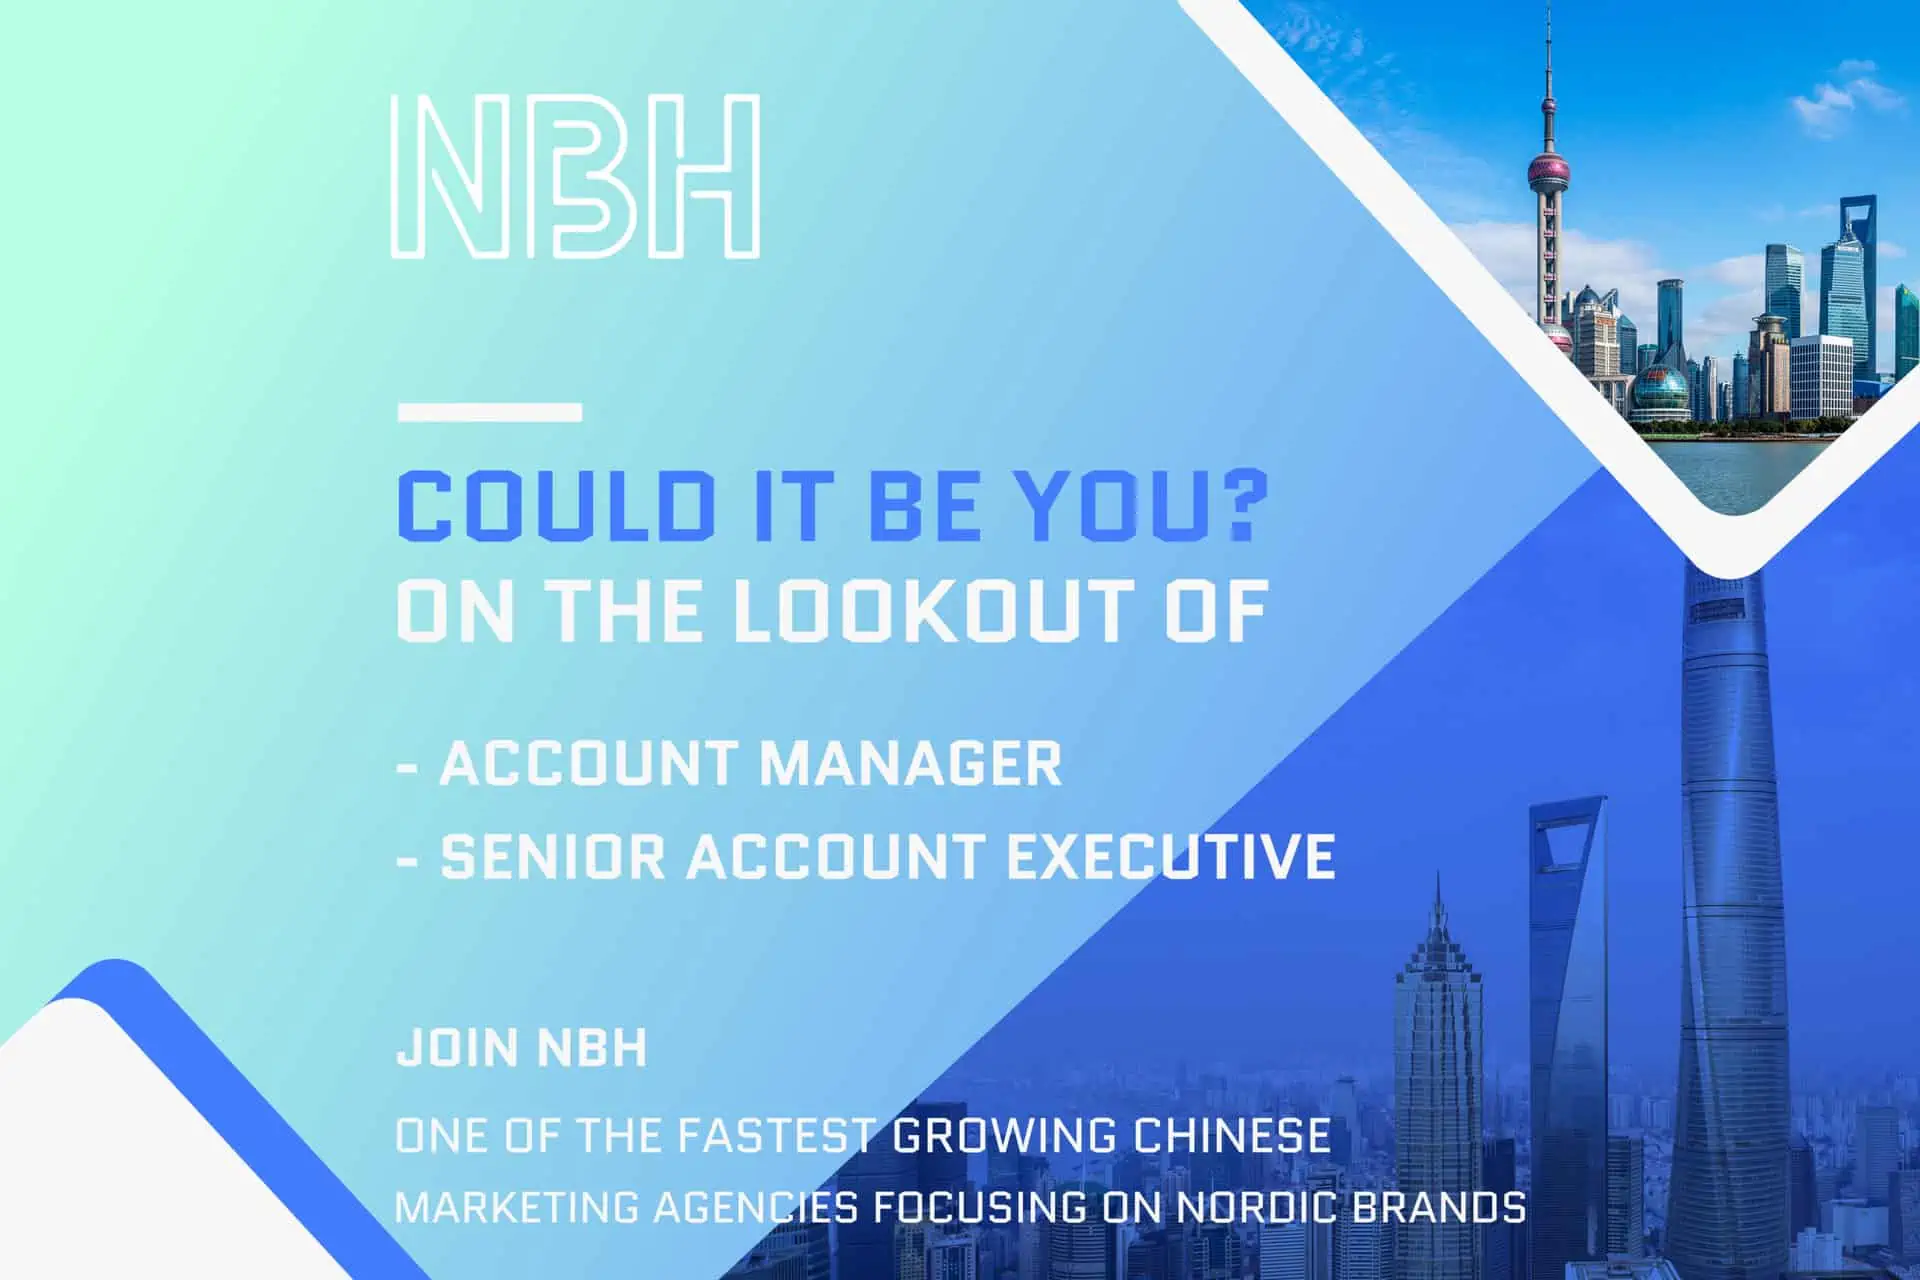 New job openings available at NBH Shanghai office